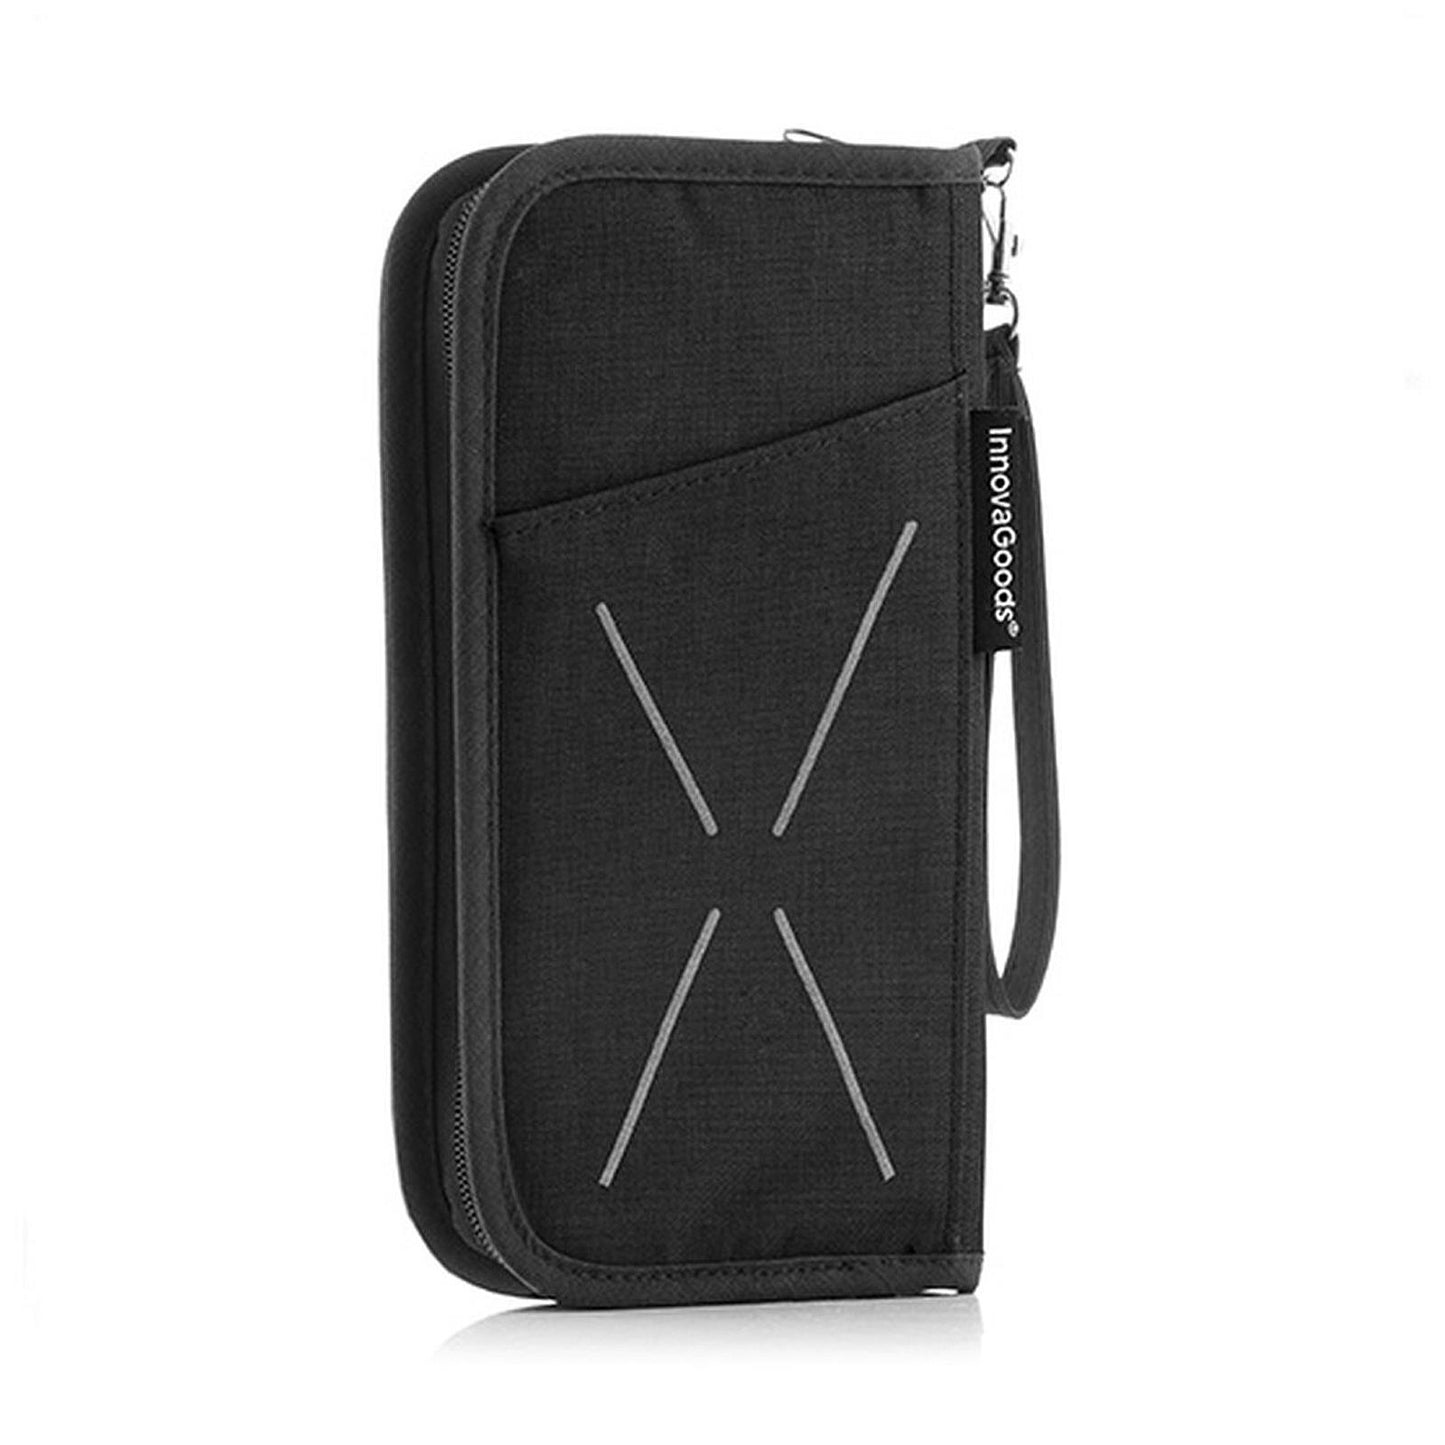 Rfid-Blocking Tactical Wallet For Anti-Theft Protection